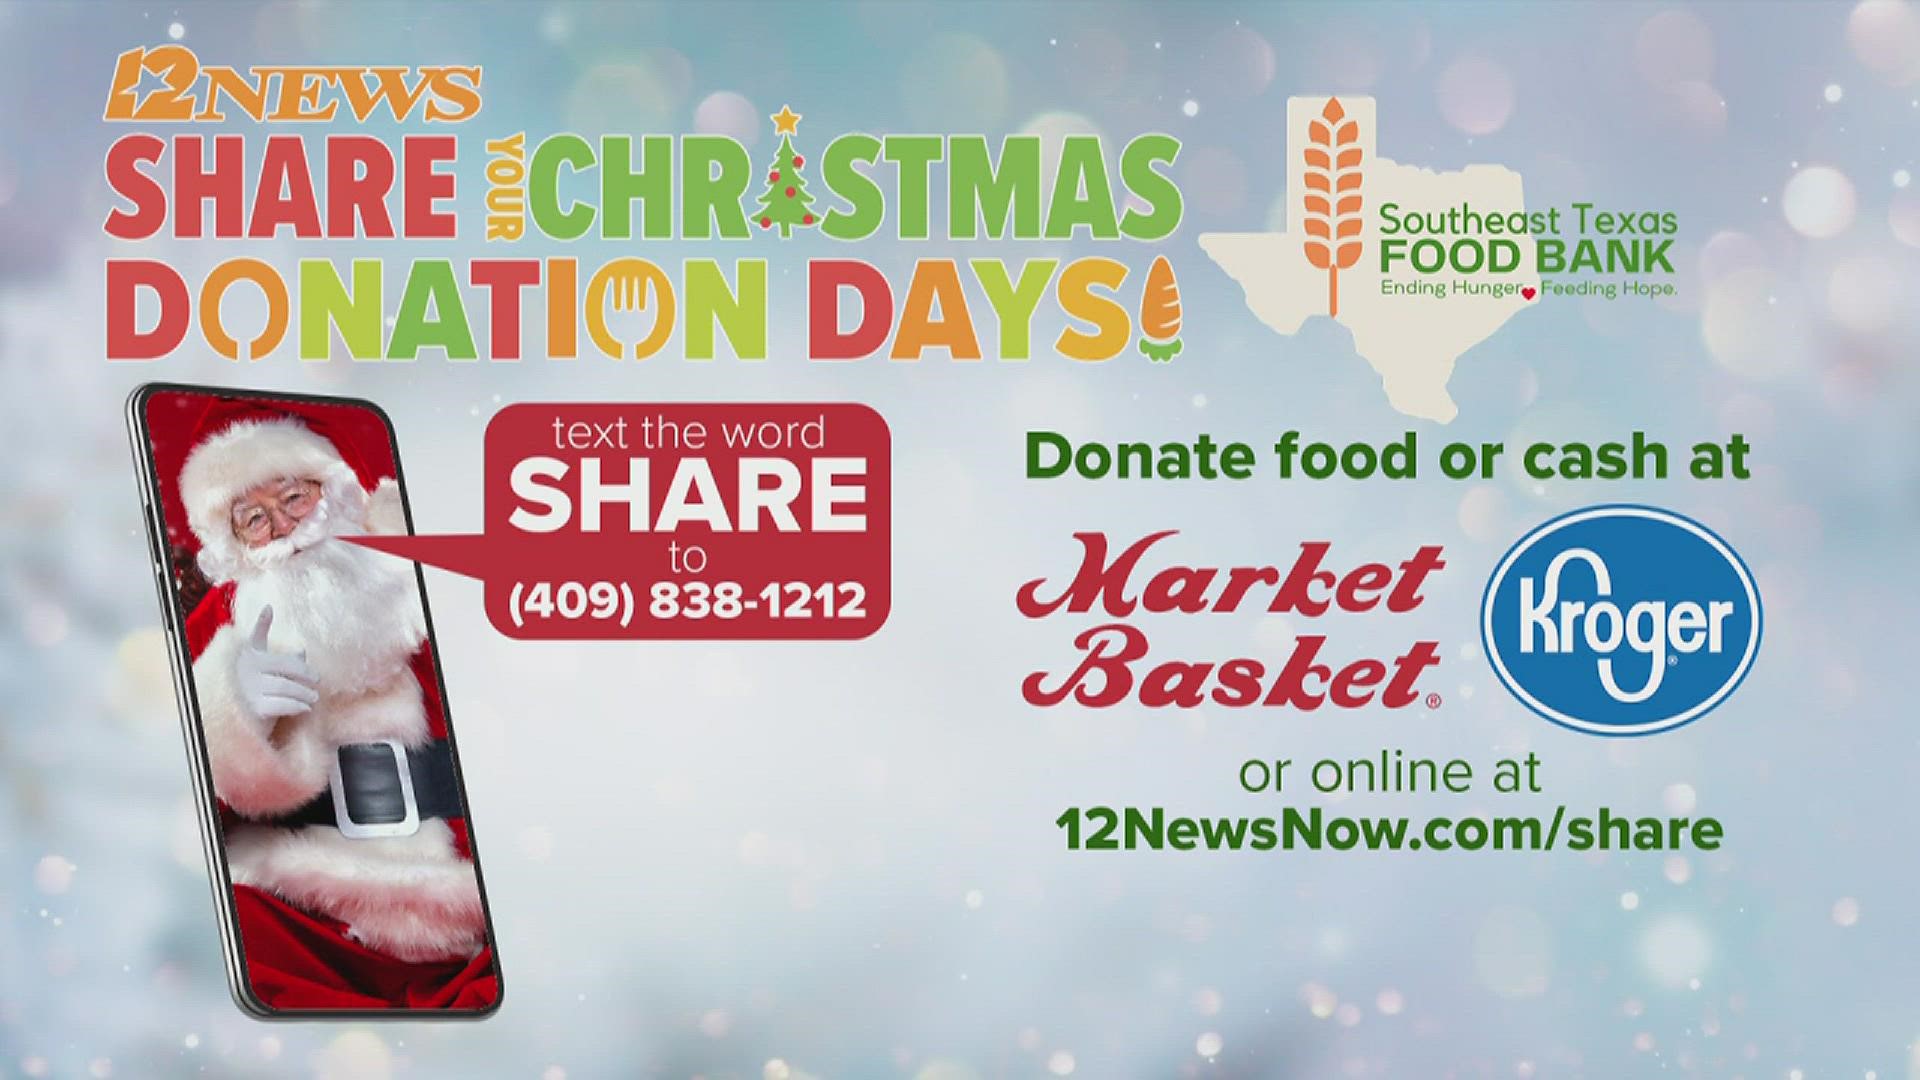 For years the Share Your Christmas food drive has been a partnership of media, grocery stores and the Southeast Texas Food Bank to help eliminate hunger.